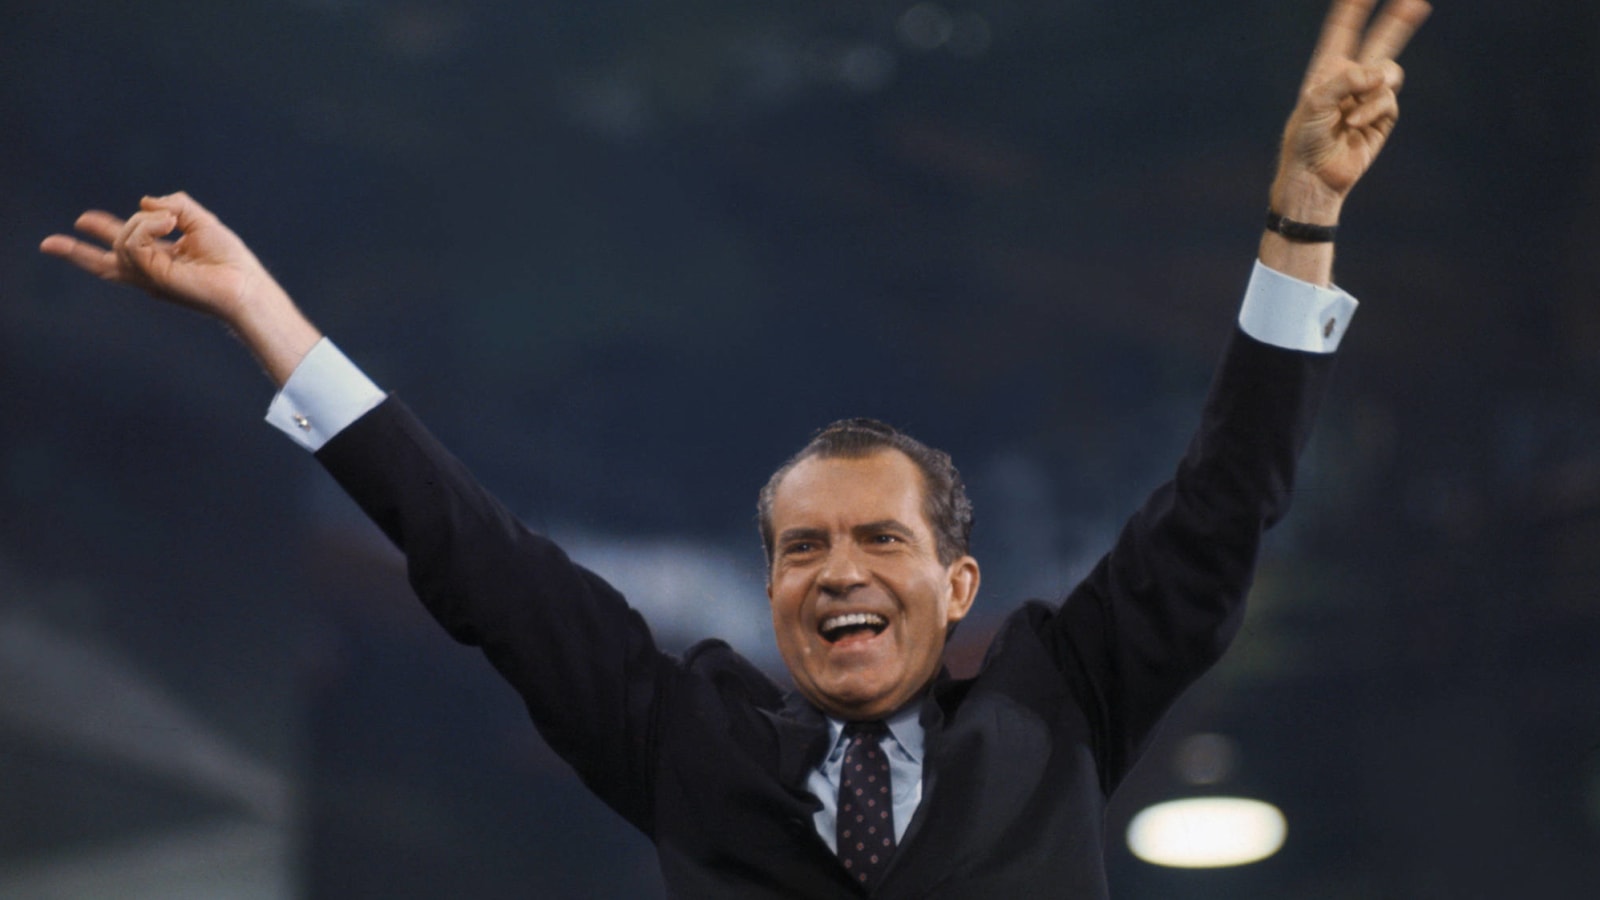 50 years after his election: How Richard Nixon is reflected in popular culture